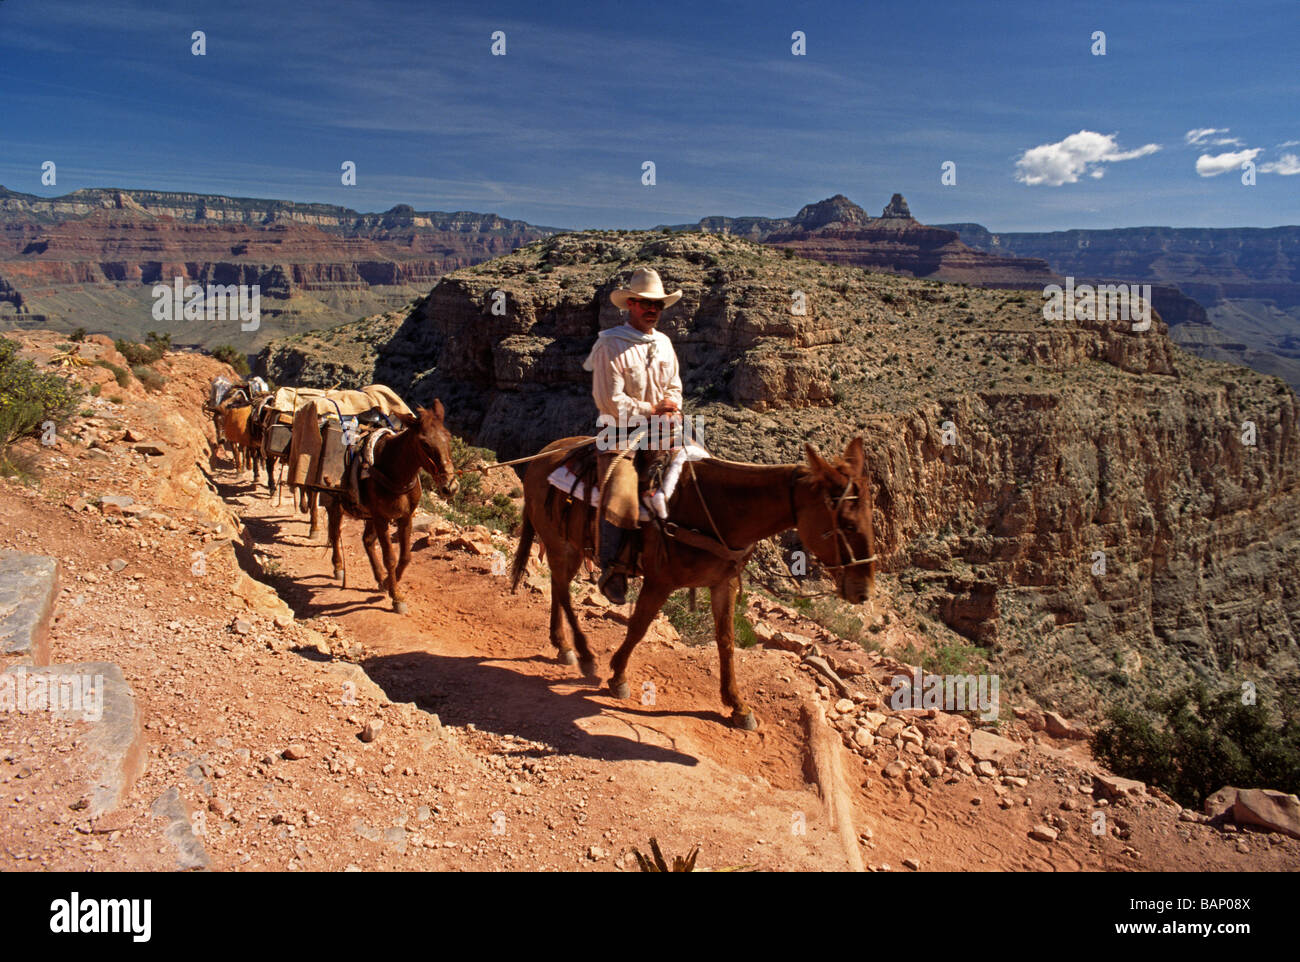 MULE TRAINS are used to transport both people luggage too from PHANTOM RANCH -GRAND CANYON NATIONAL PARK ARIZONA Stock Photo